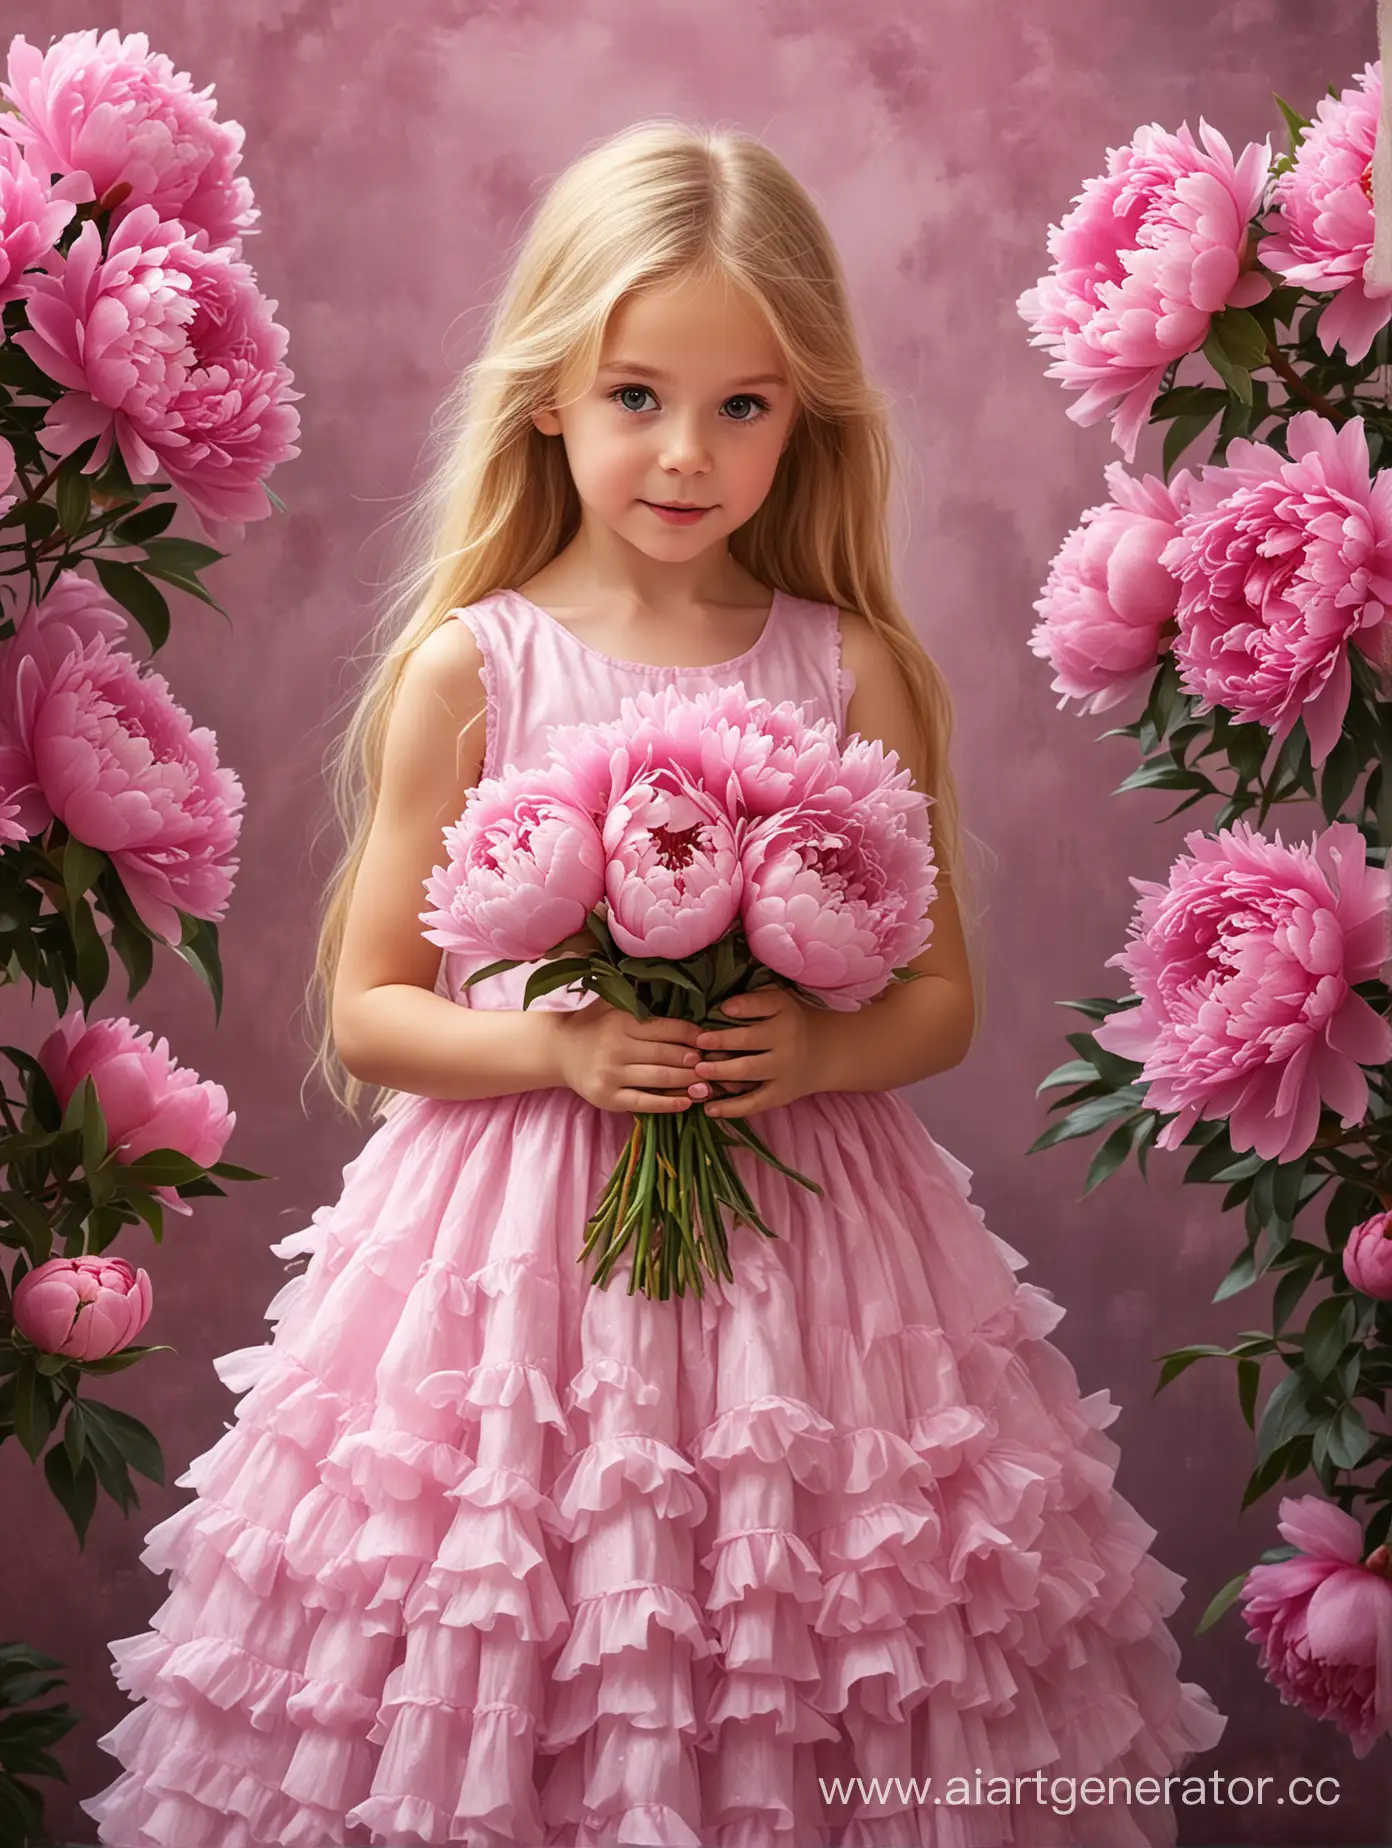 Blonde-Child-with-Peony-Bouquet-on-Pink-Dress